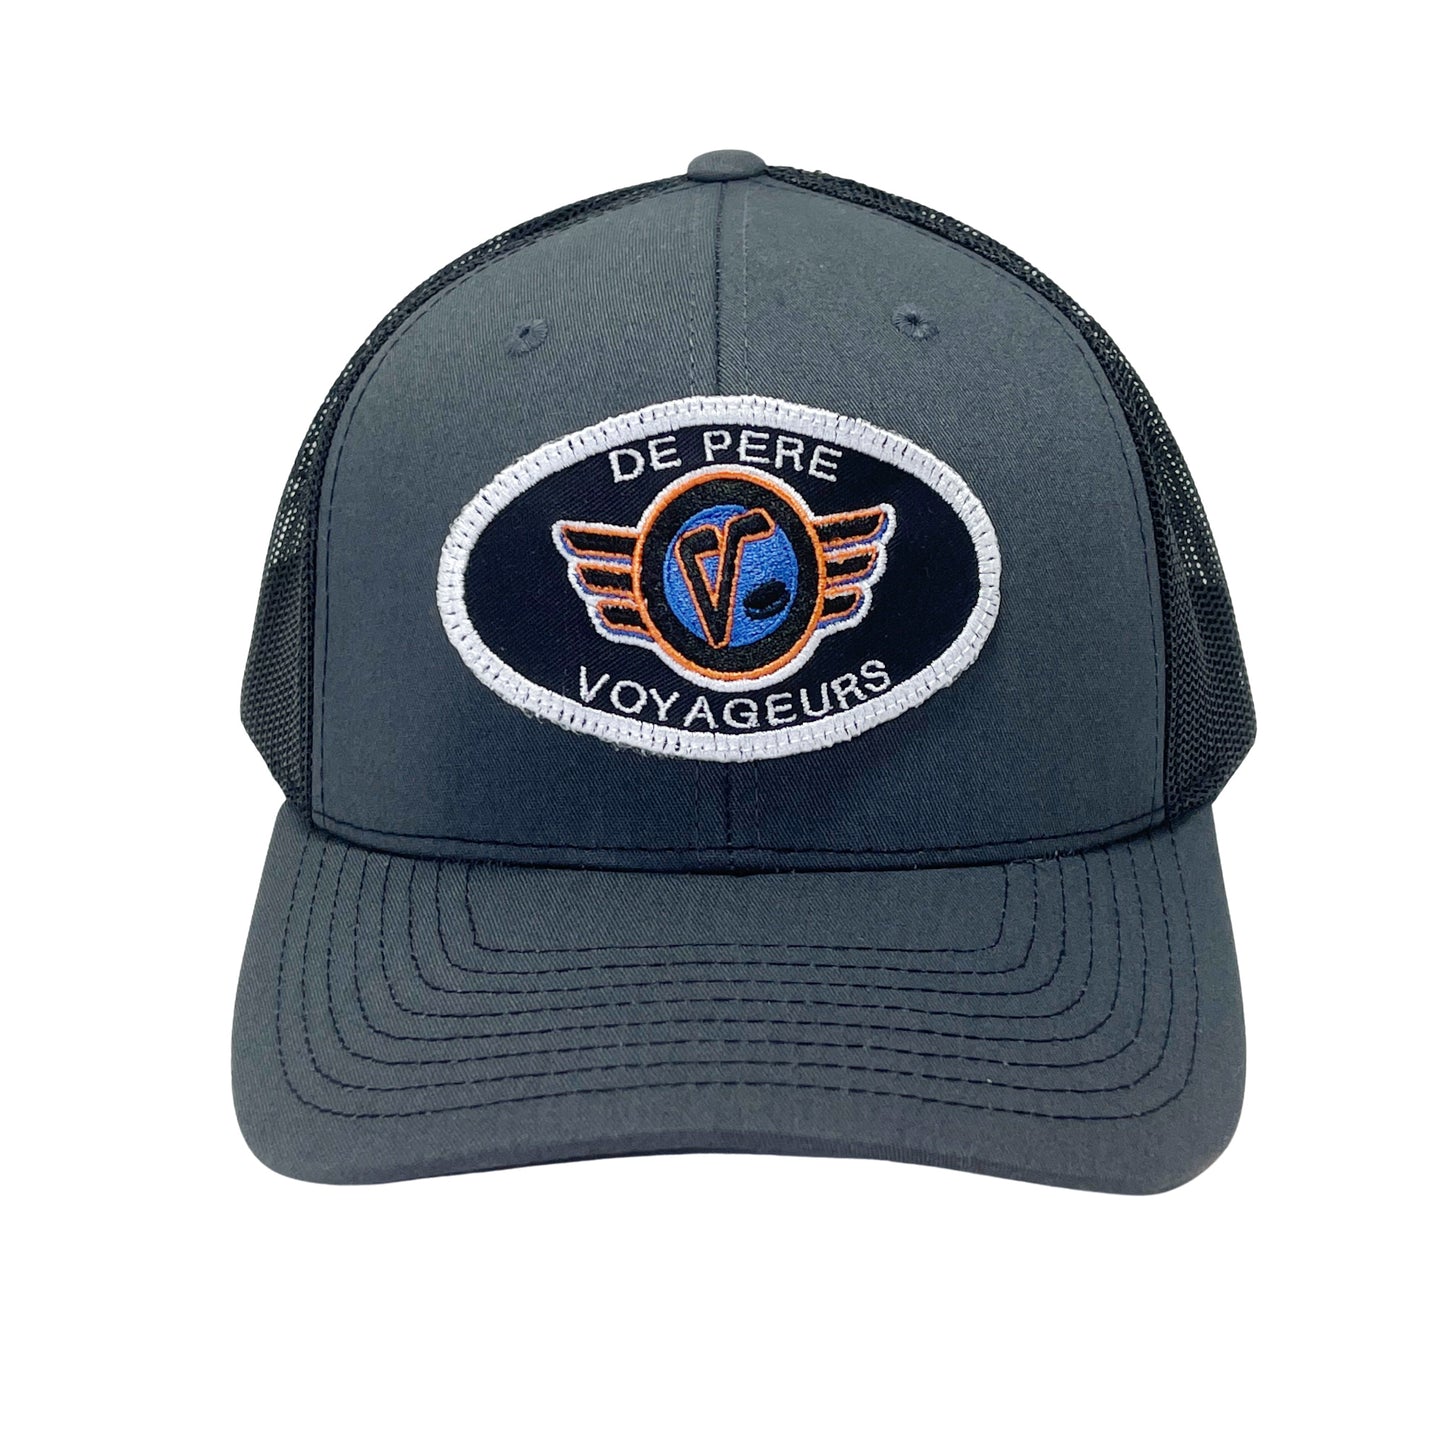 De Pere Voyageurs Youth Hockey Patch De Pere Charcoal Gray Snapback